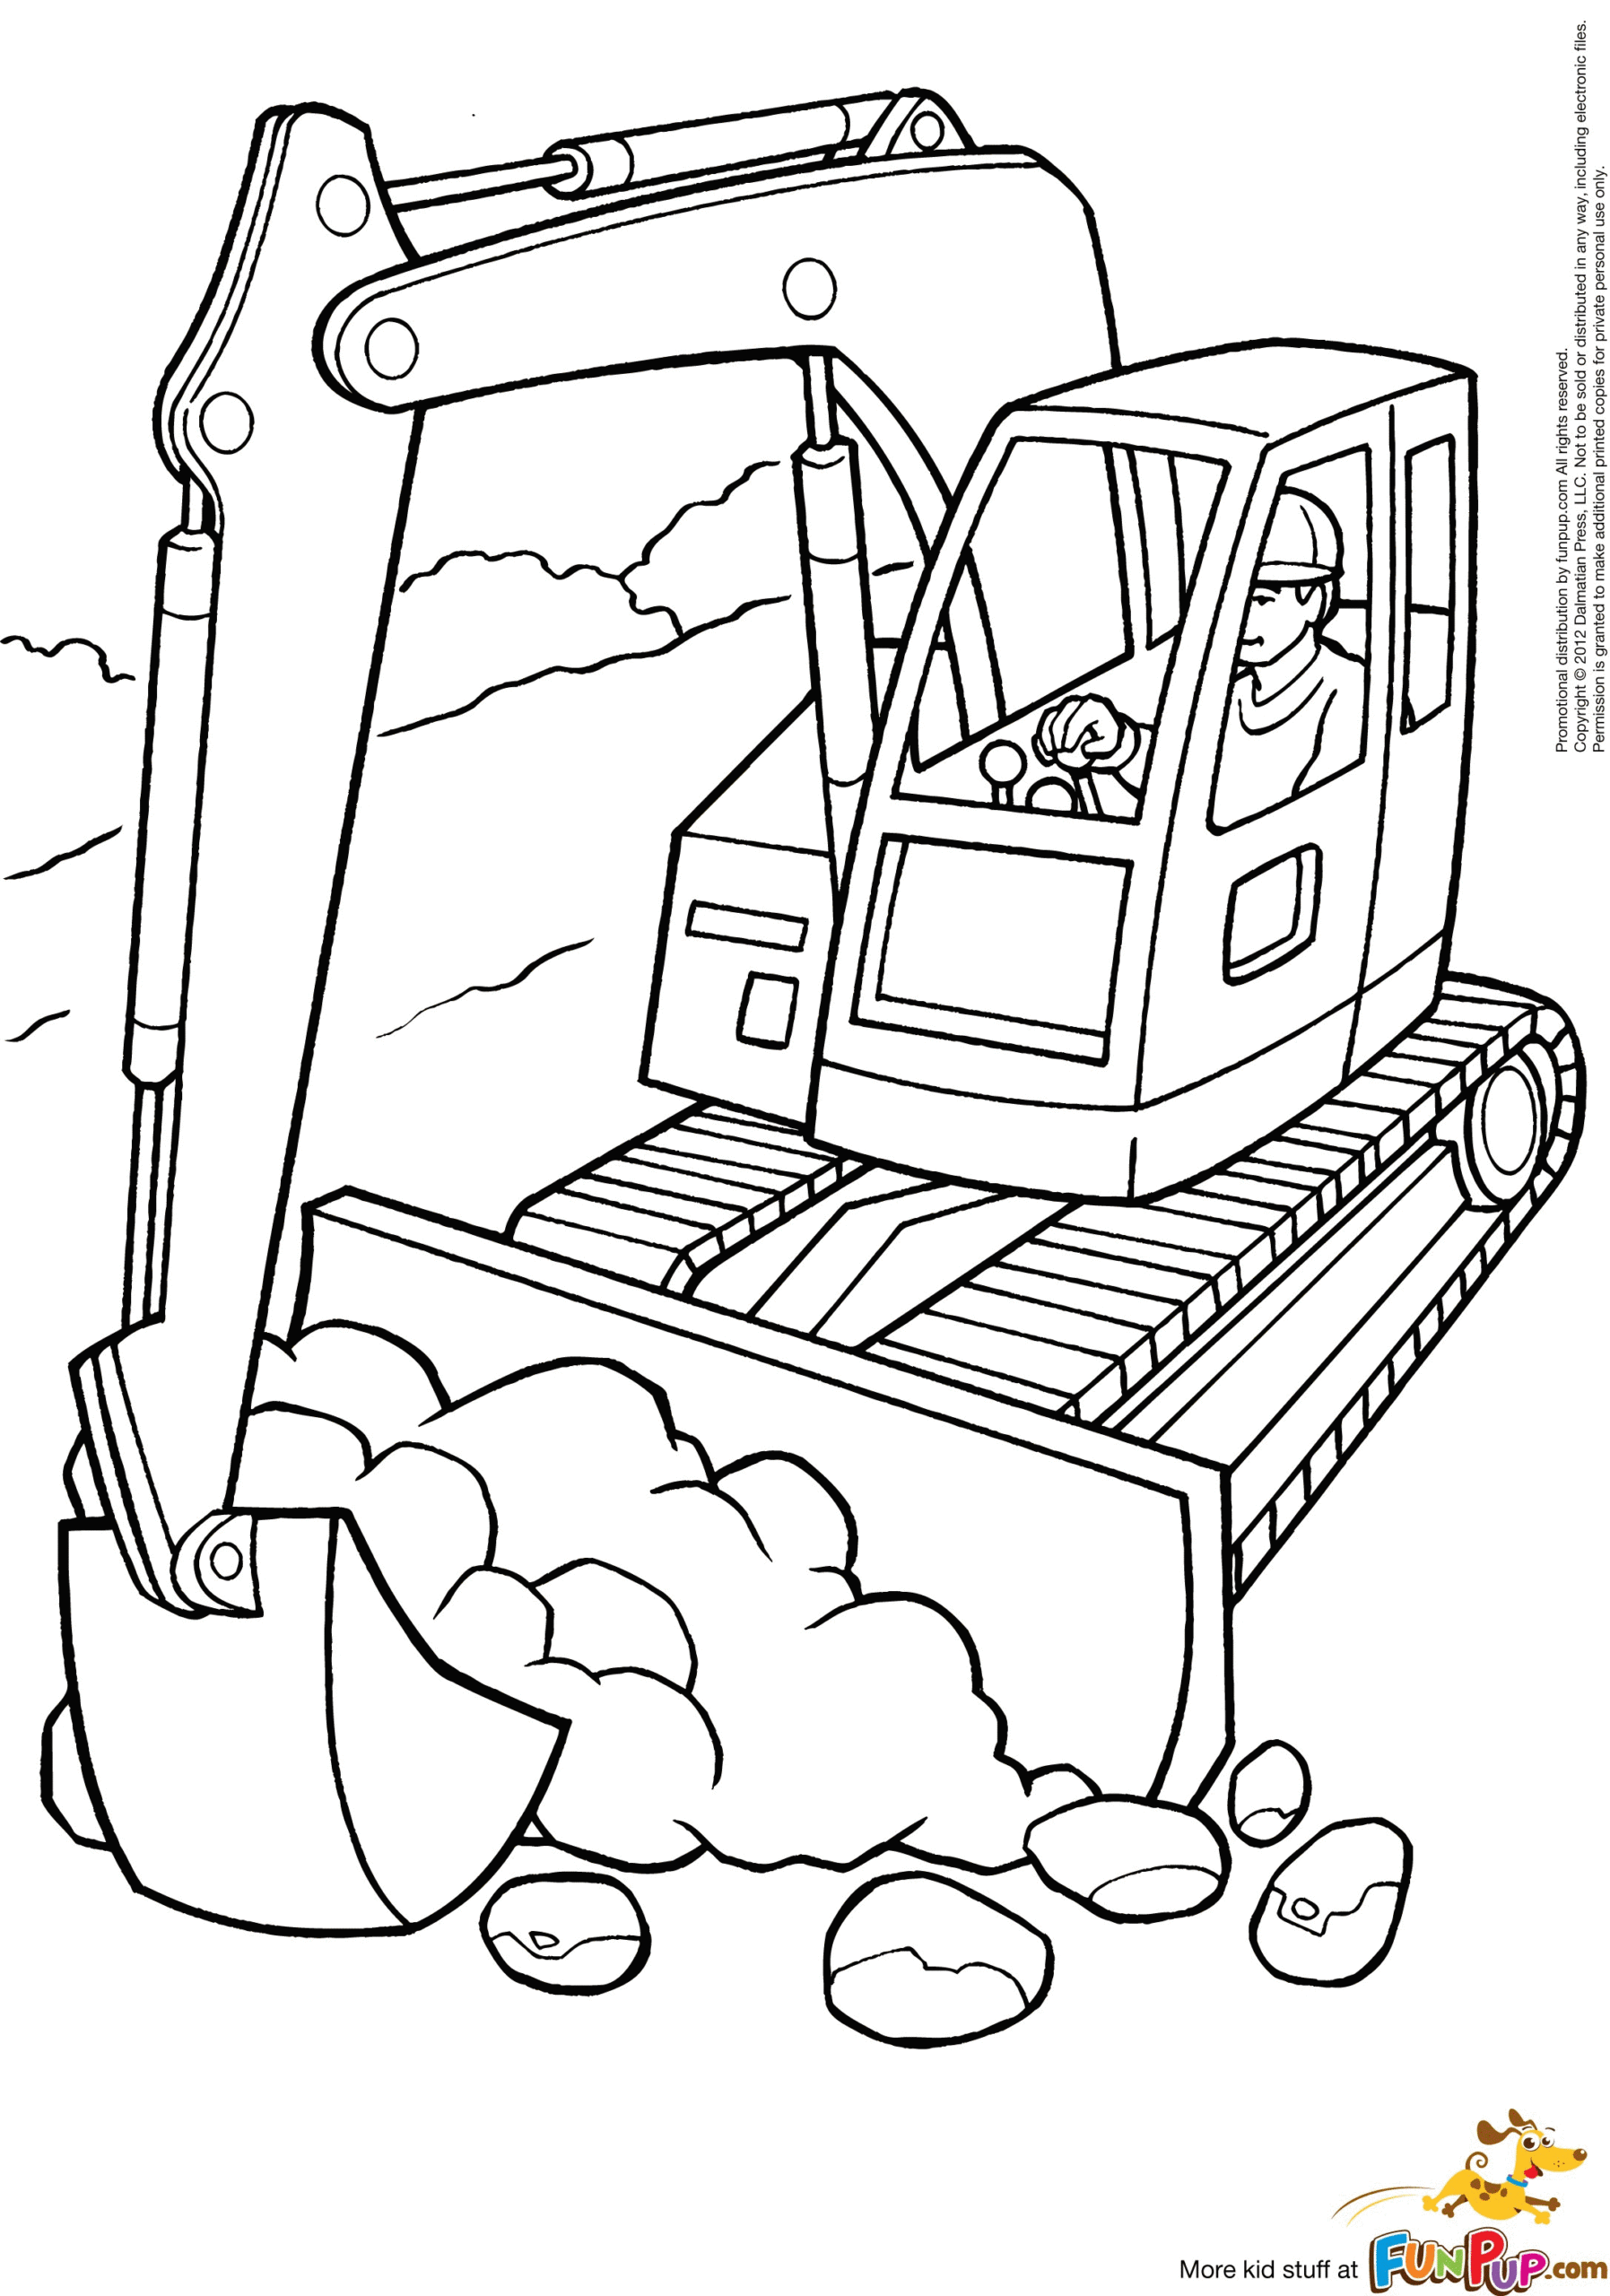 Coloring: Amazing Construction Coloring Pages Photo Inspirations. Hard Hat Coloring  Pages. Construction Hat Coloring Pages Printable Free. Free Construction  Coloring Pages To Print. Printable Construction Coloring Pages For Kids. Construction  Coloring ...